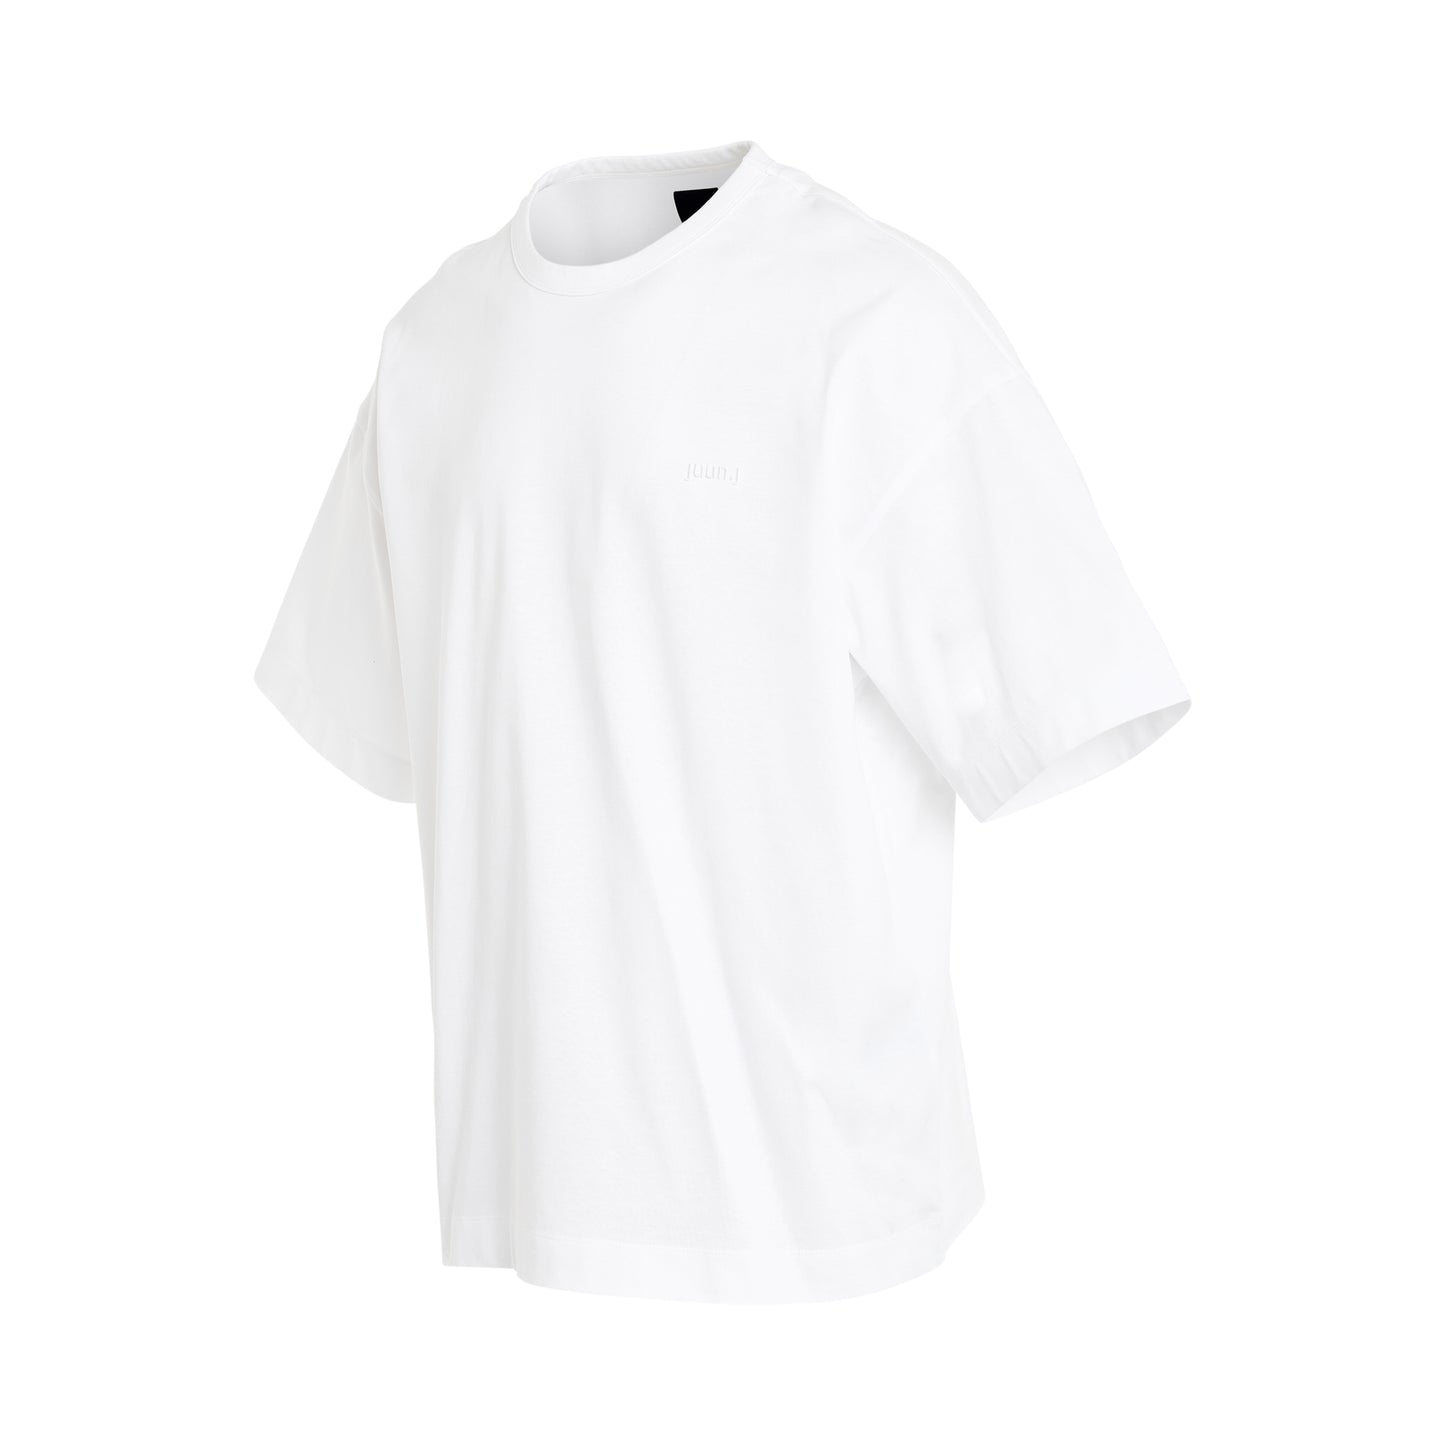 Semi-Over Fit Short Sleeve T-Shirt in White